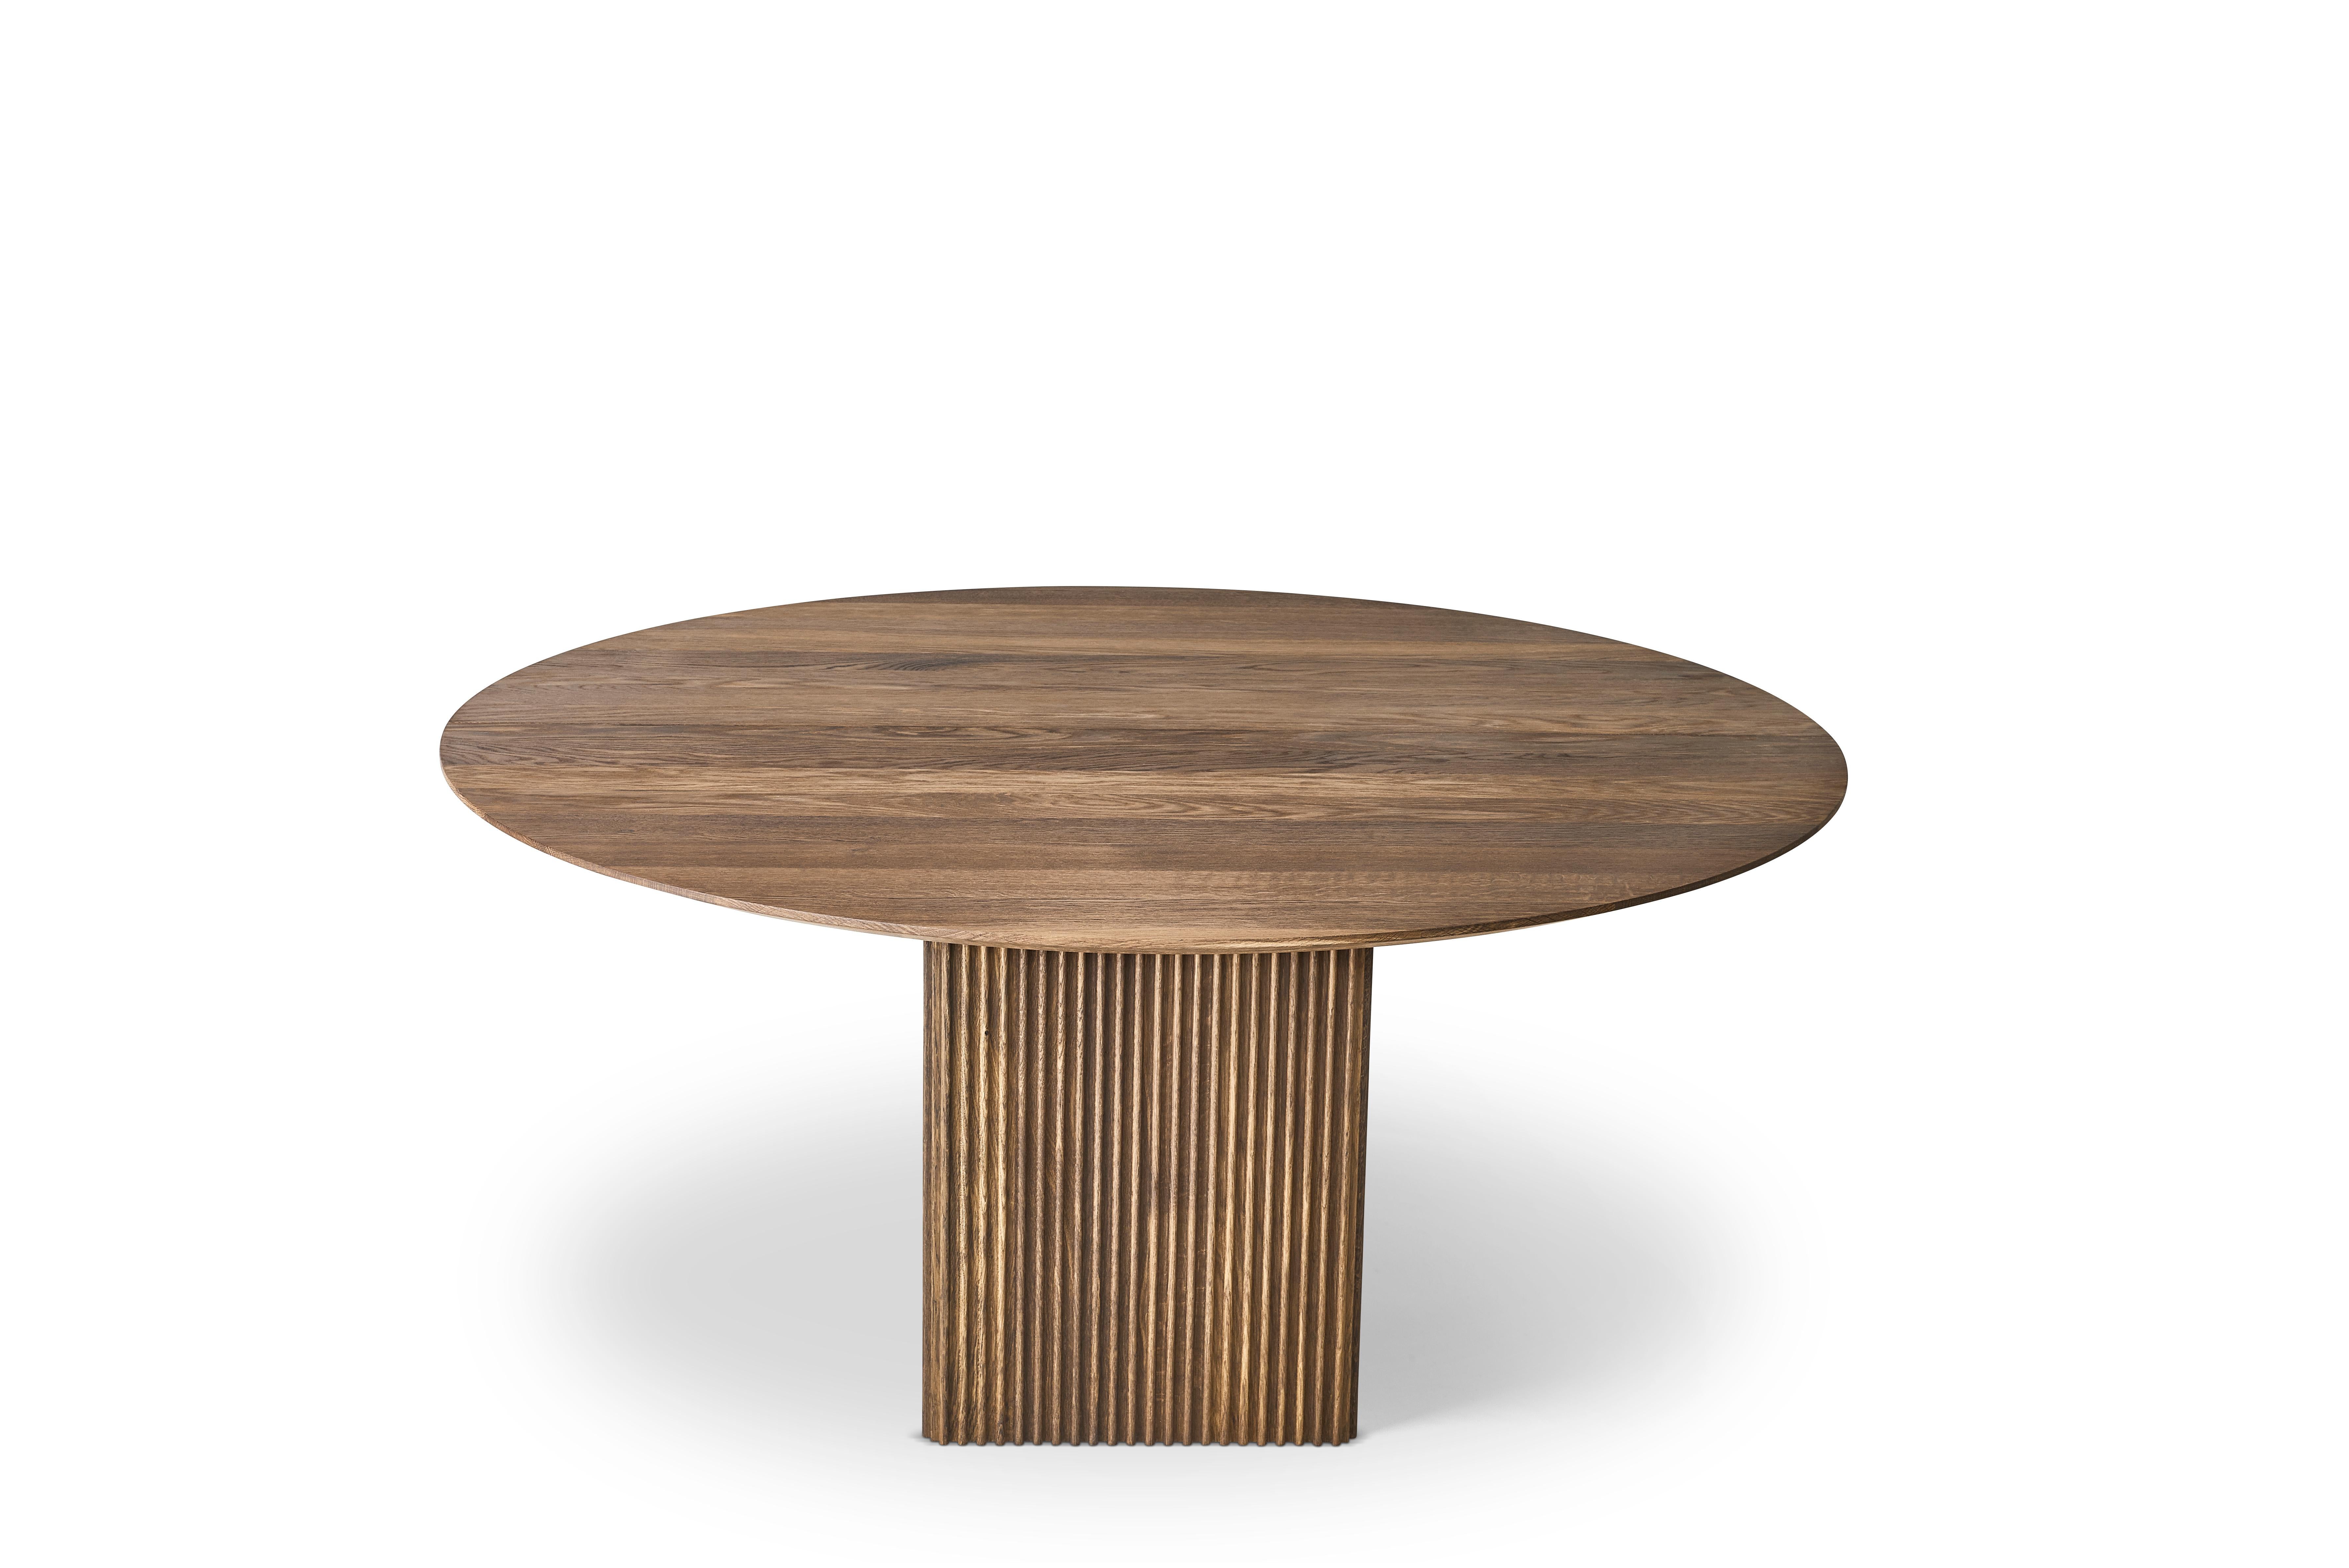 TEN Round Table 180 by DK3 
Solid wood tabletop and legs

Table height: 72 or 74 cm
Tabletop diameter: 180 cm
Tabletop thickness: 3 cm

Wood :
– Oak
– Smoked oak
– Walnut.

 Price may vary according to the wood type and size. 

--
TEN TABLE
Design